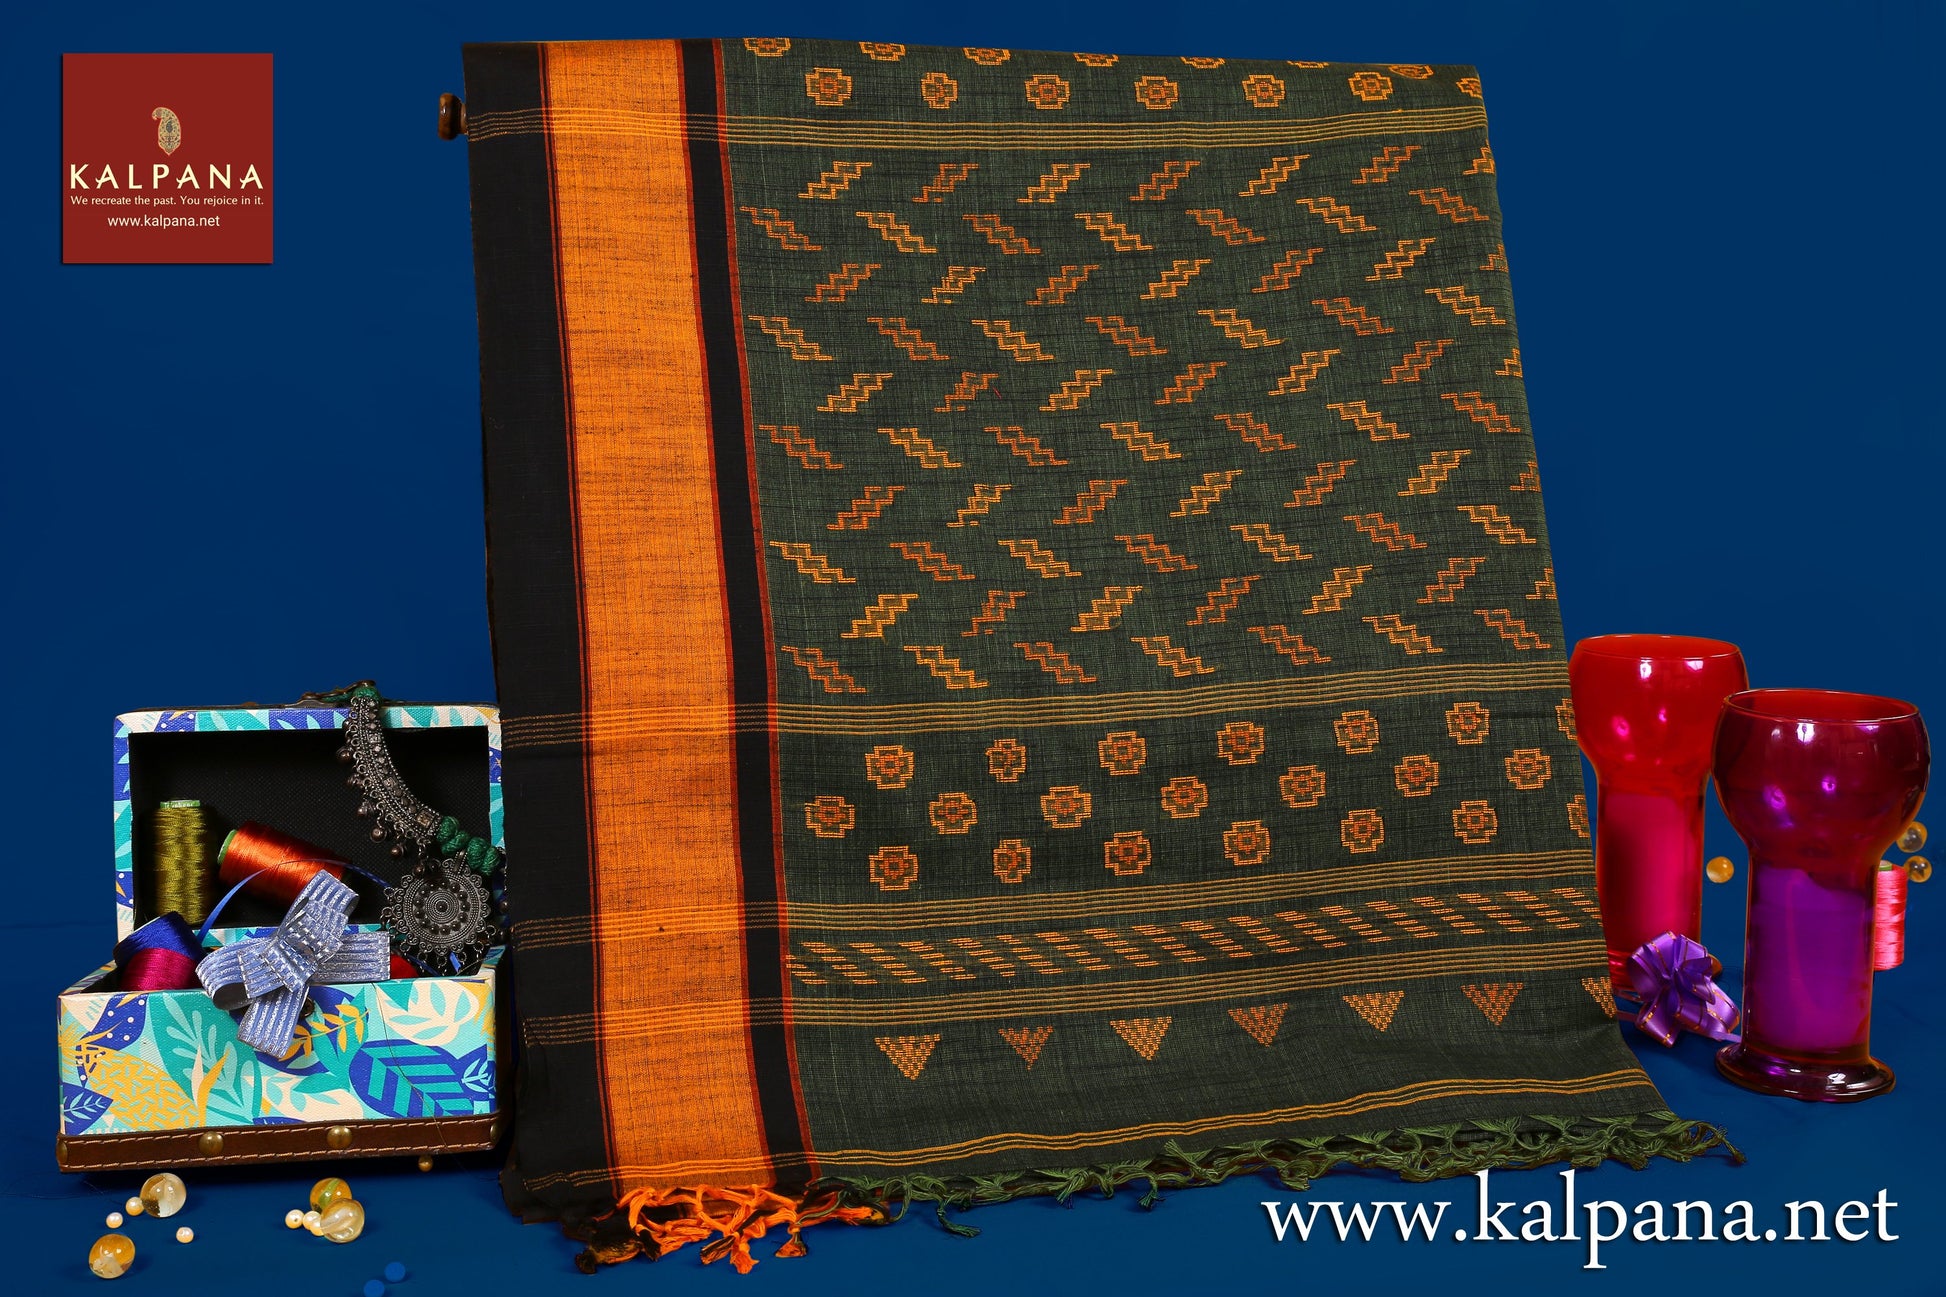  Handloom Pure Cotton Saree with All Over Motifs and Woven Border. The Palla is  Woven. It comes with Self Colored Plain Unstitched Blouse with Woven Border. Perfect for Work Wear.  Recommended for Summer season(s). Dry Clean Only